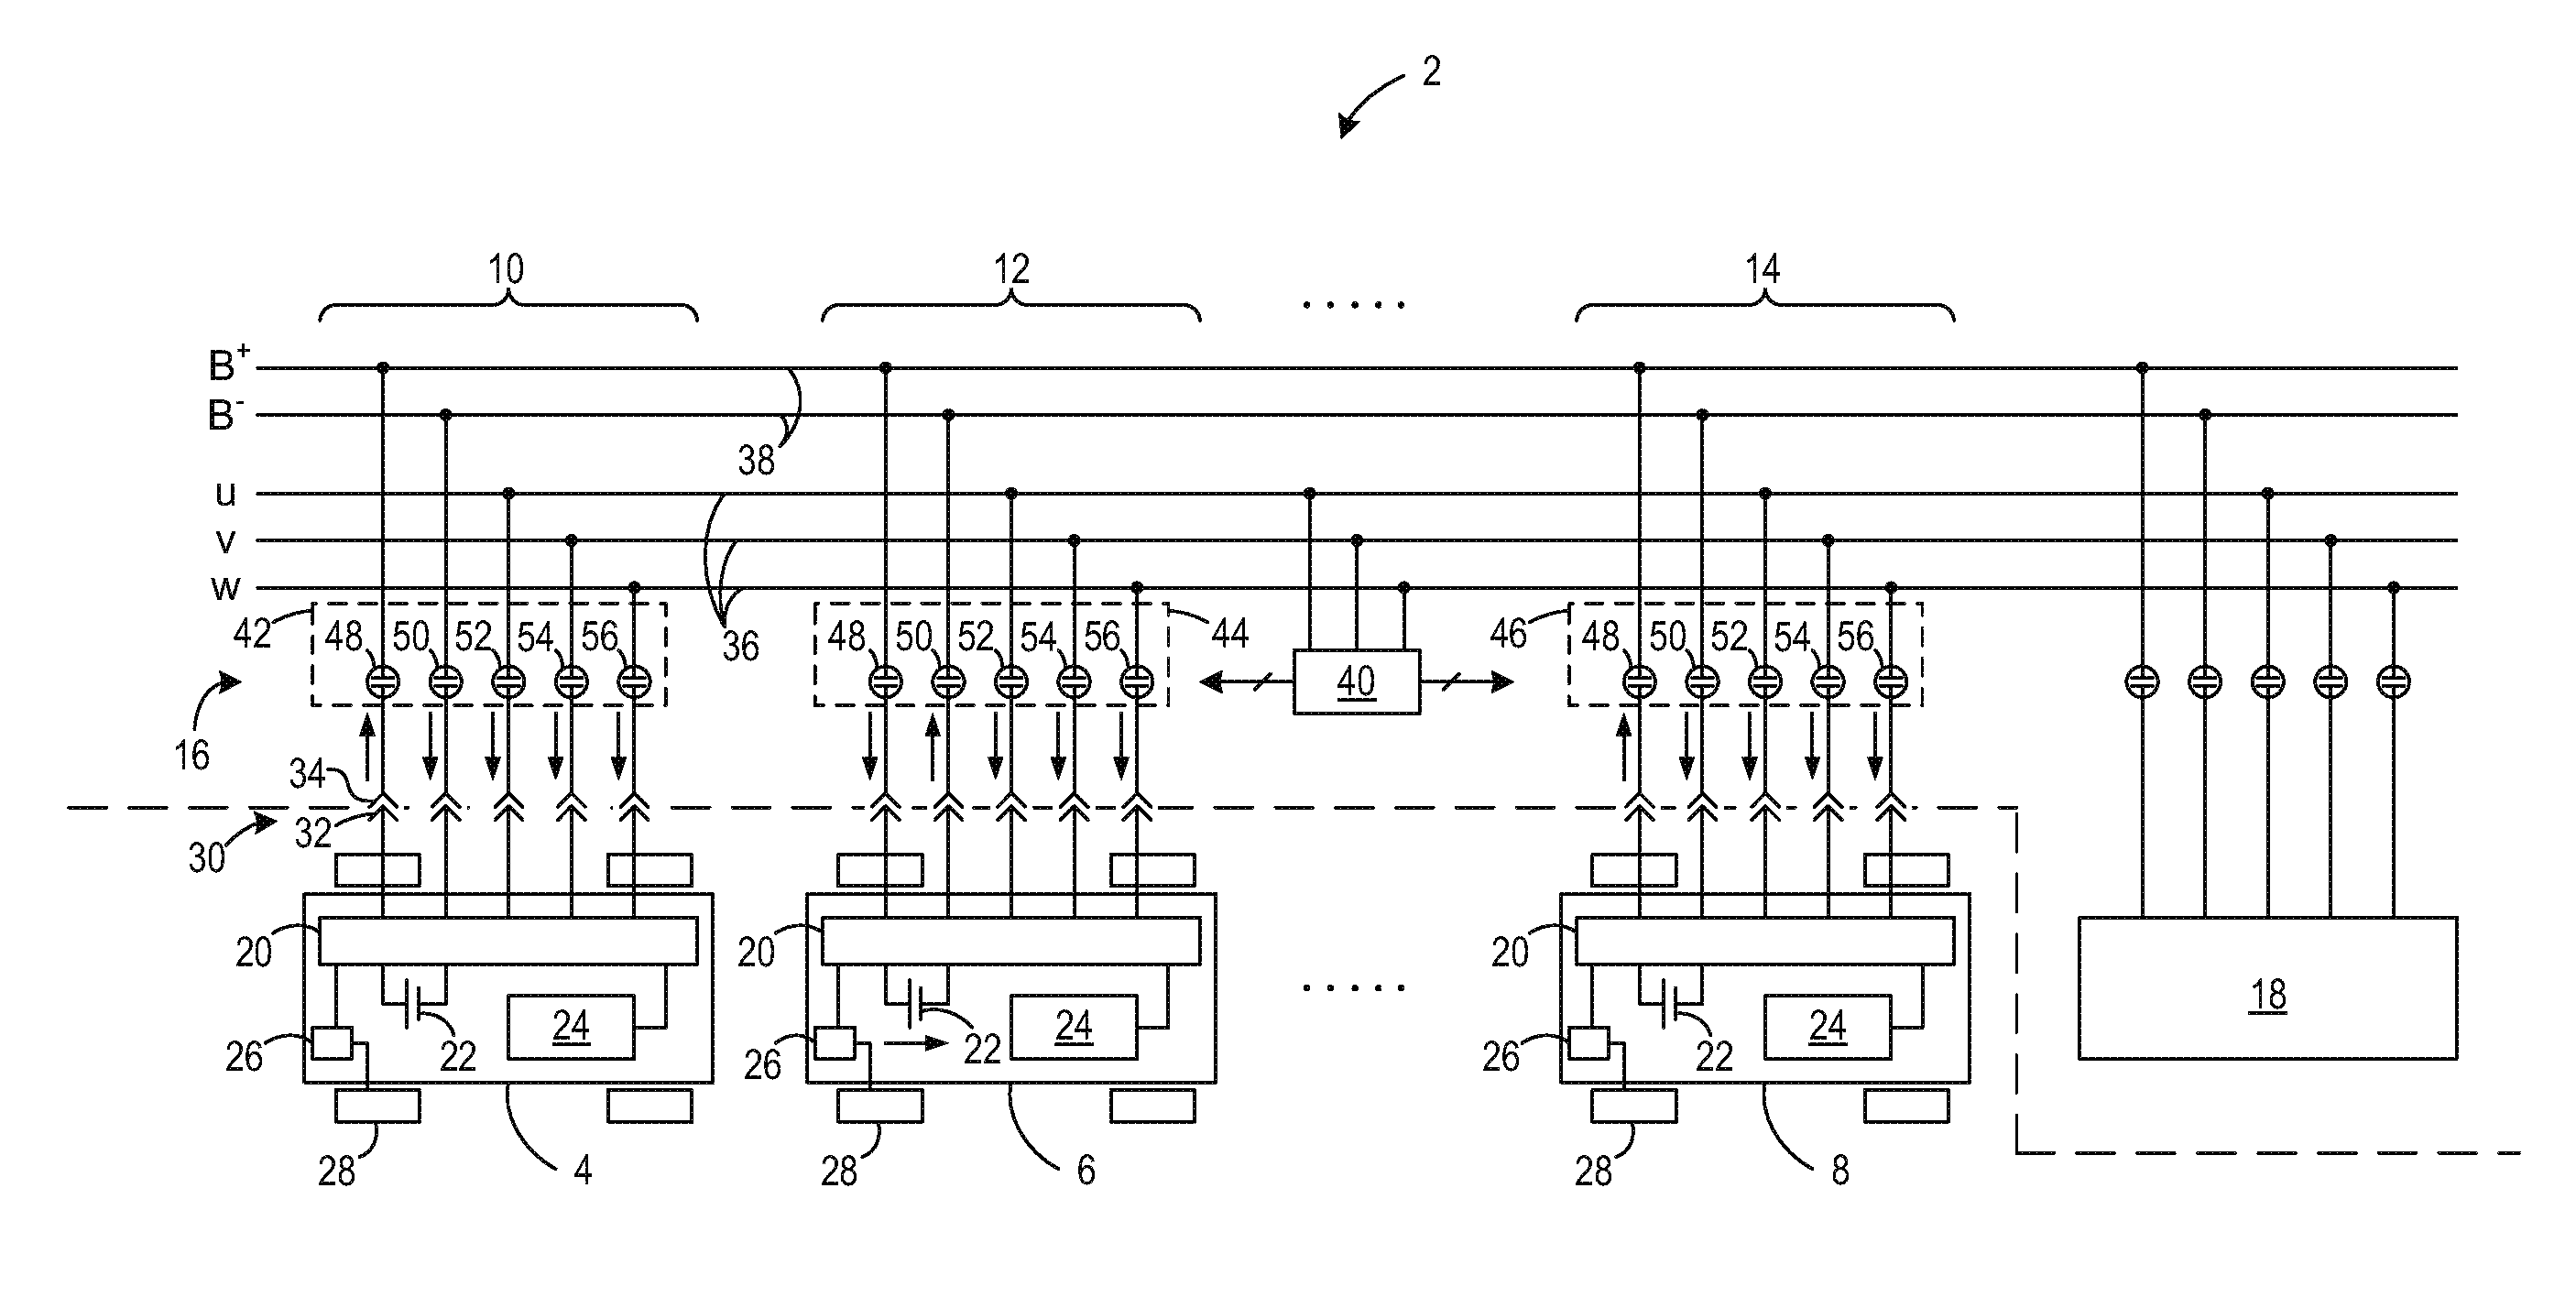 Apparatus and method for rapid charging using shared power electronics